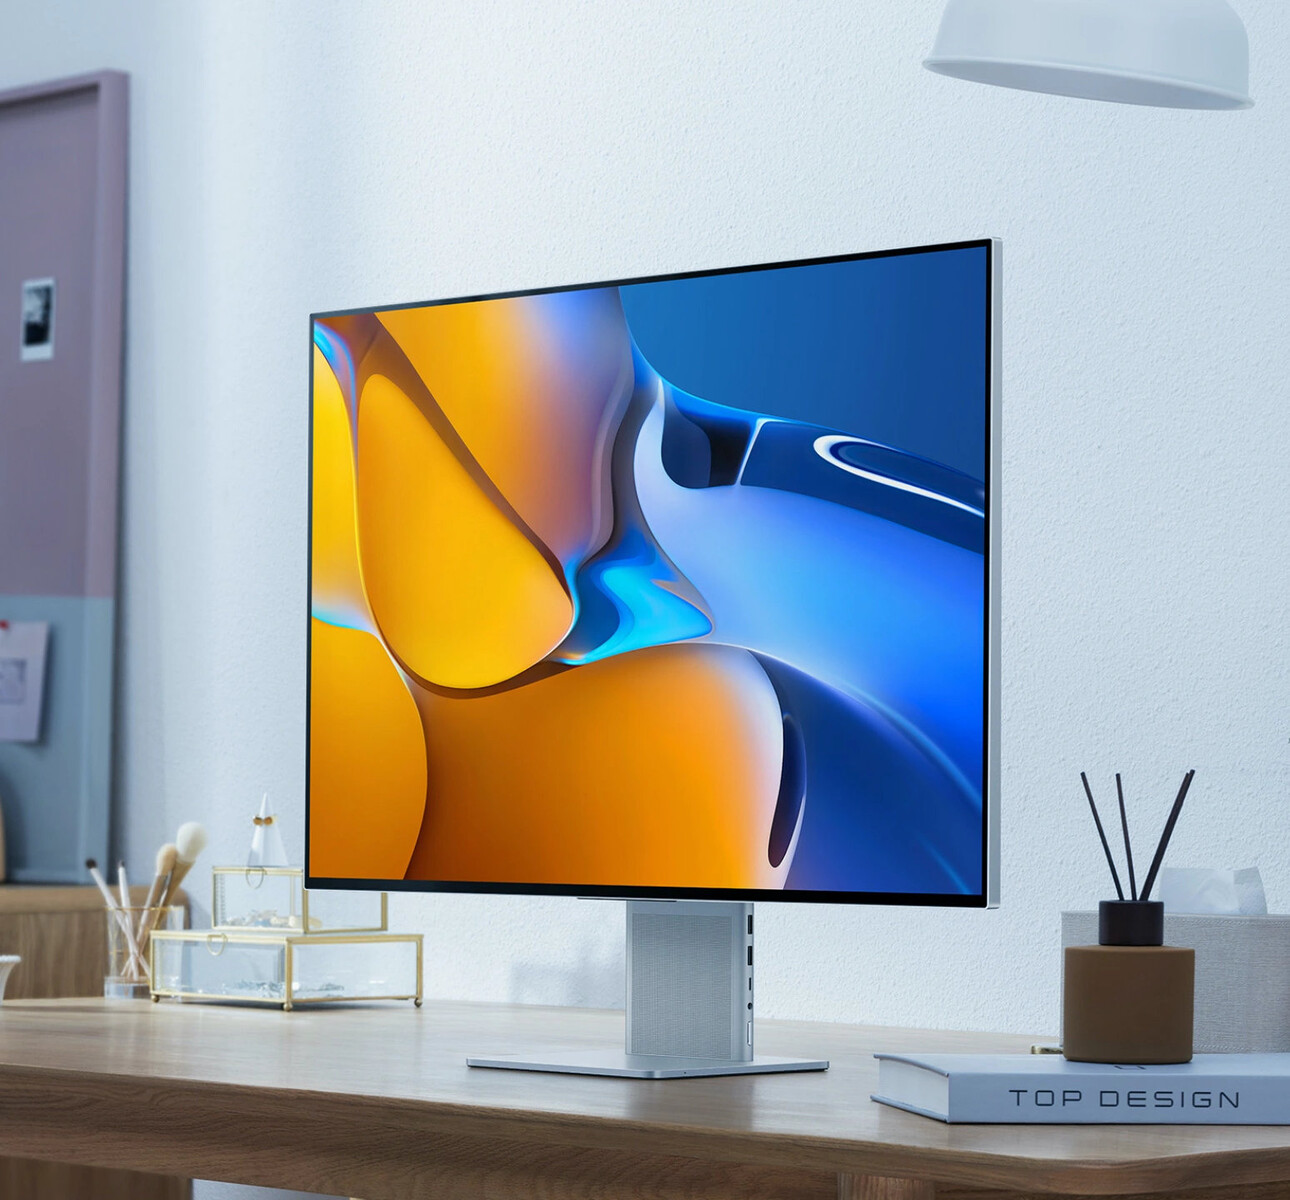 The Huawei MateView monitor is the Surface Studio of external